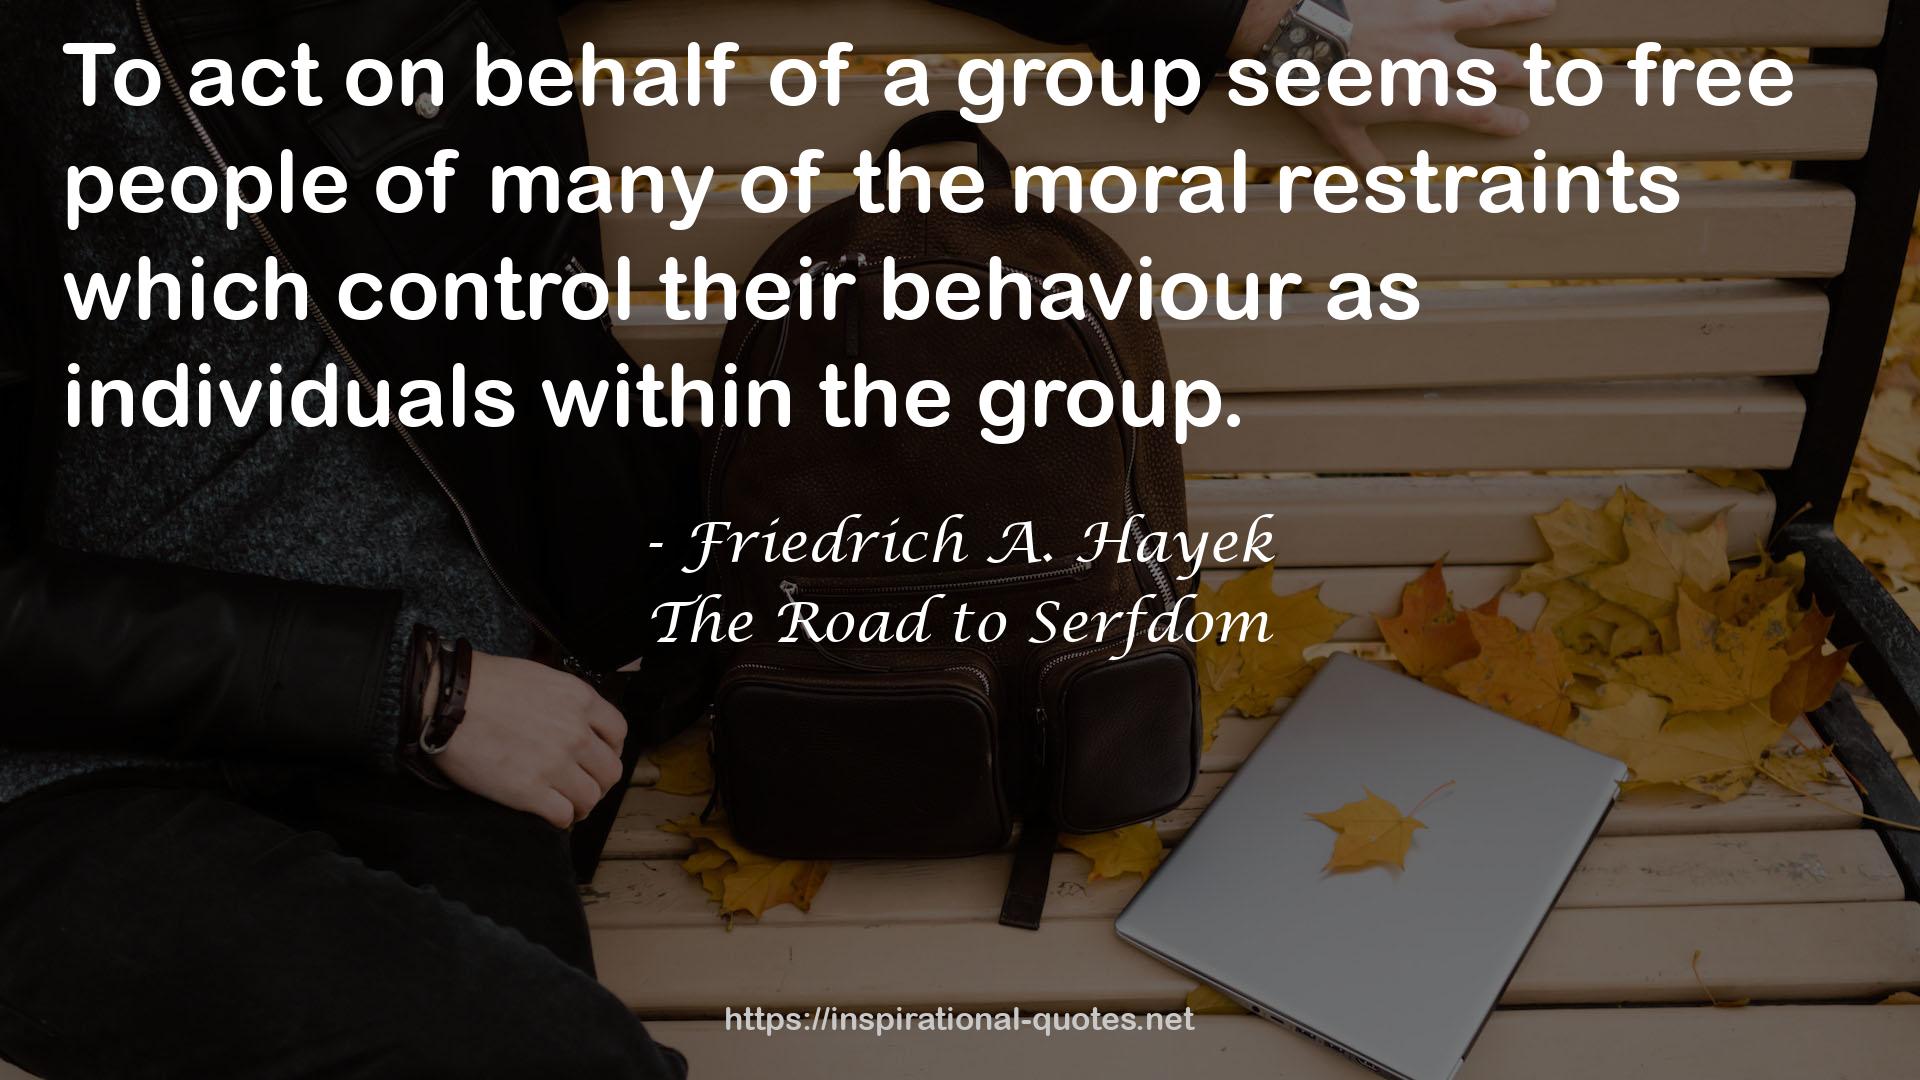 The Road to Serfdom QUOTES